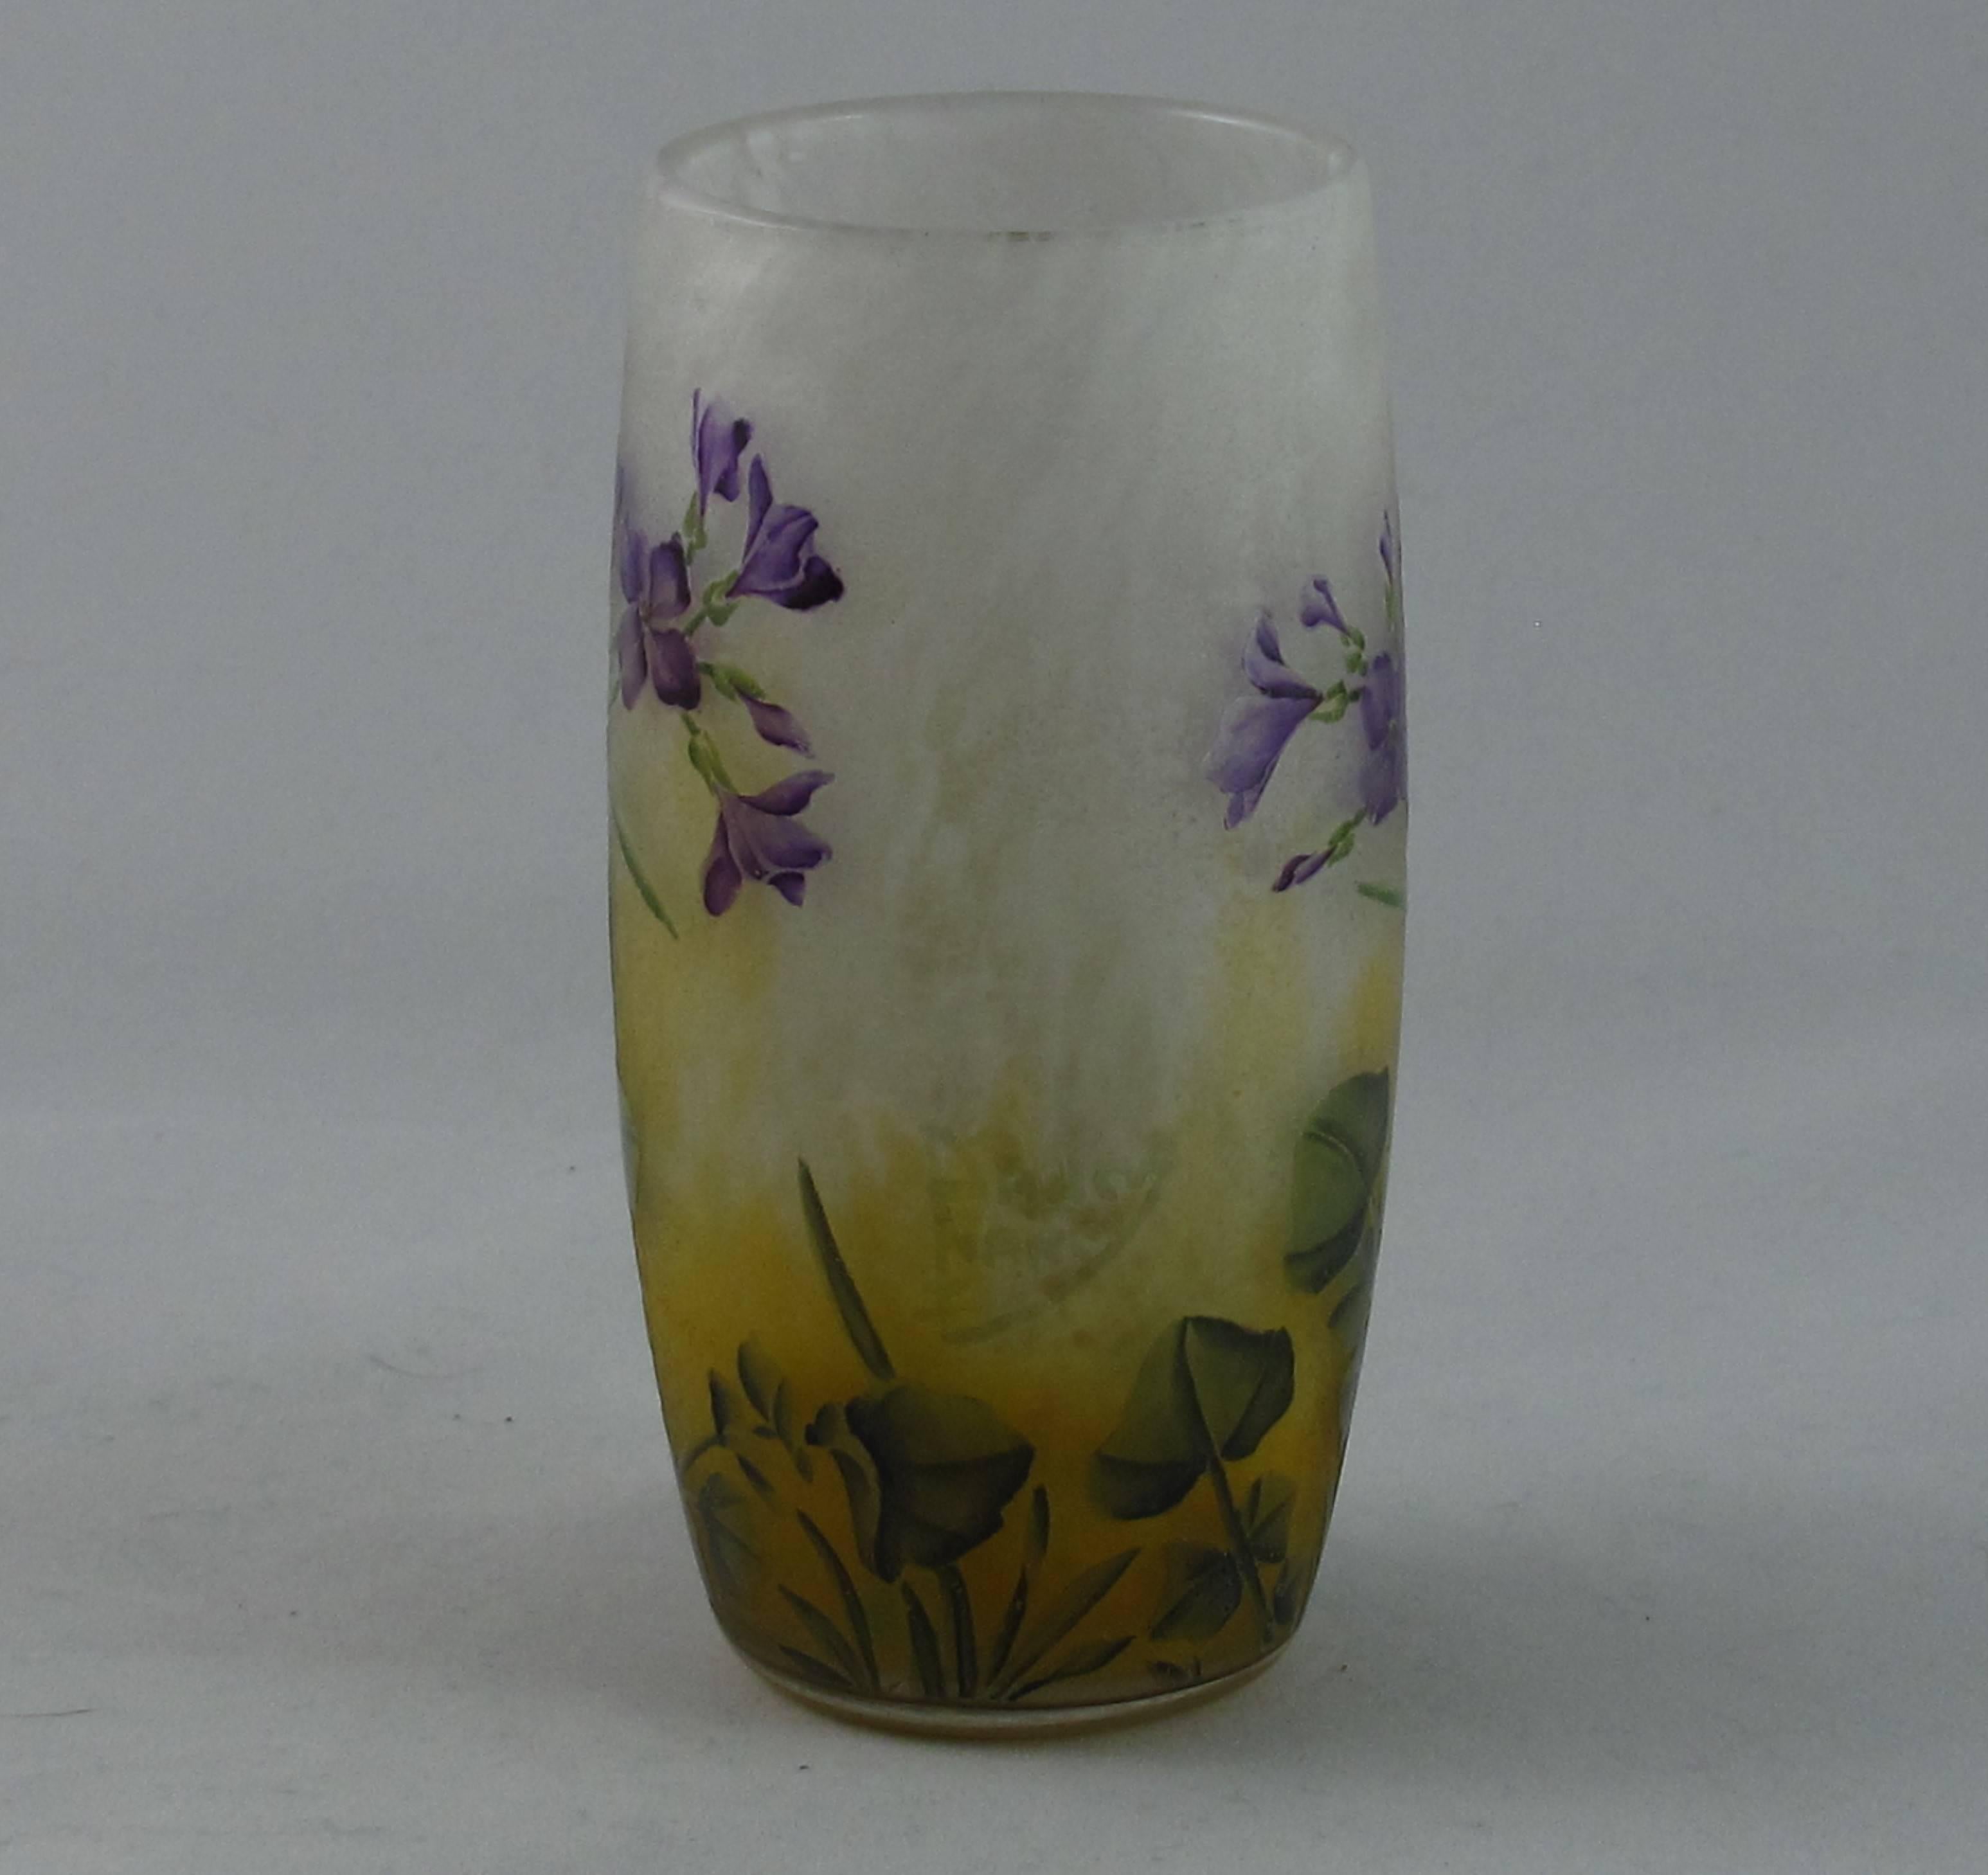 Art Nouveau Daum vase. Finely acid etched and enameled with Violet flowers and leaves. The signature Daum Nancy and the Cross of Lorraine is all in cameo. A charming piece and excellent example of this type of work, French, circa 1900. Excellent